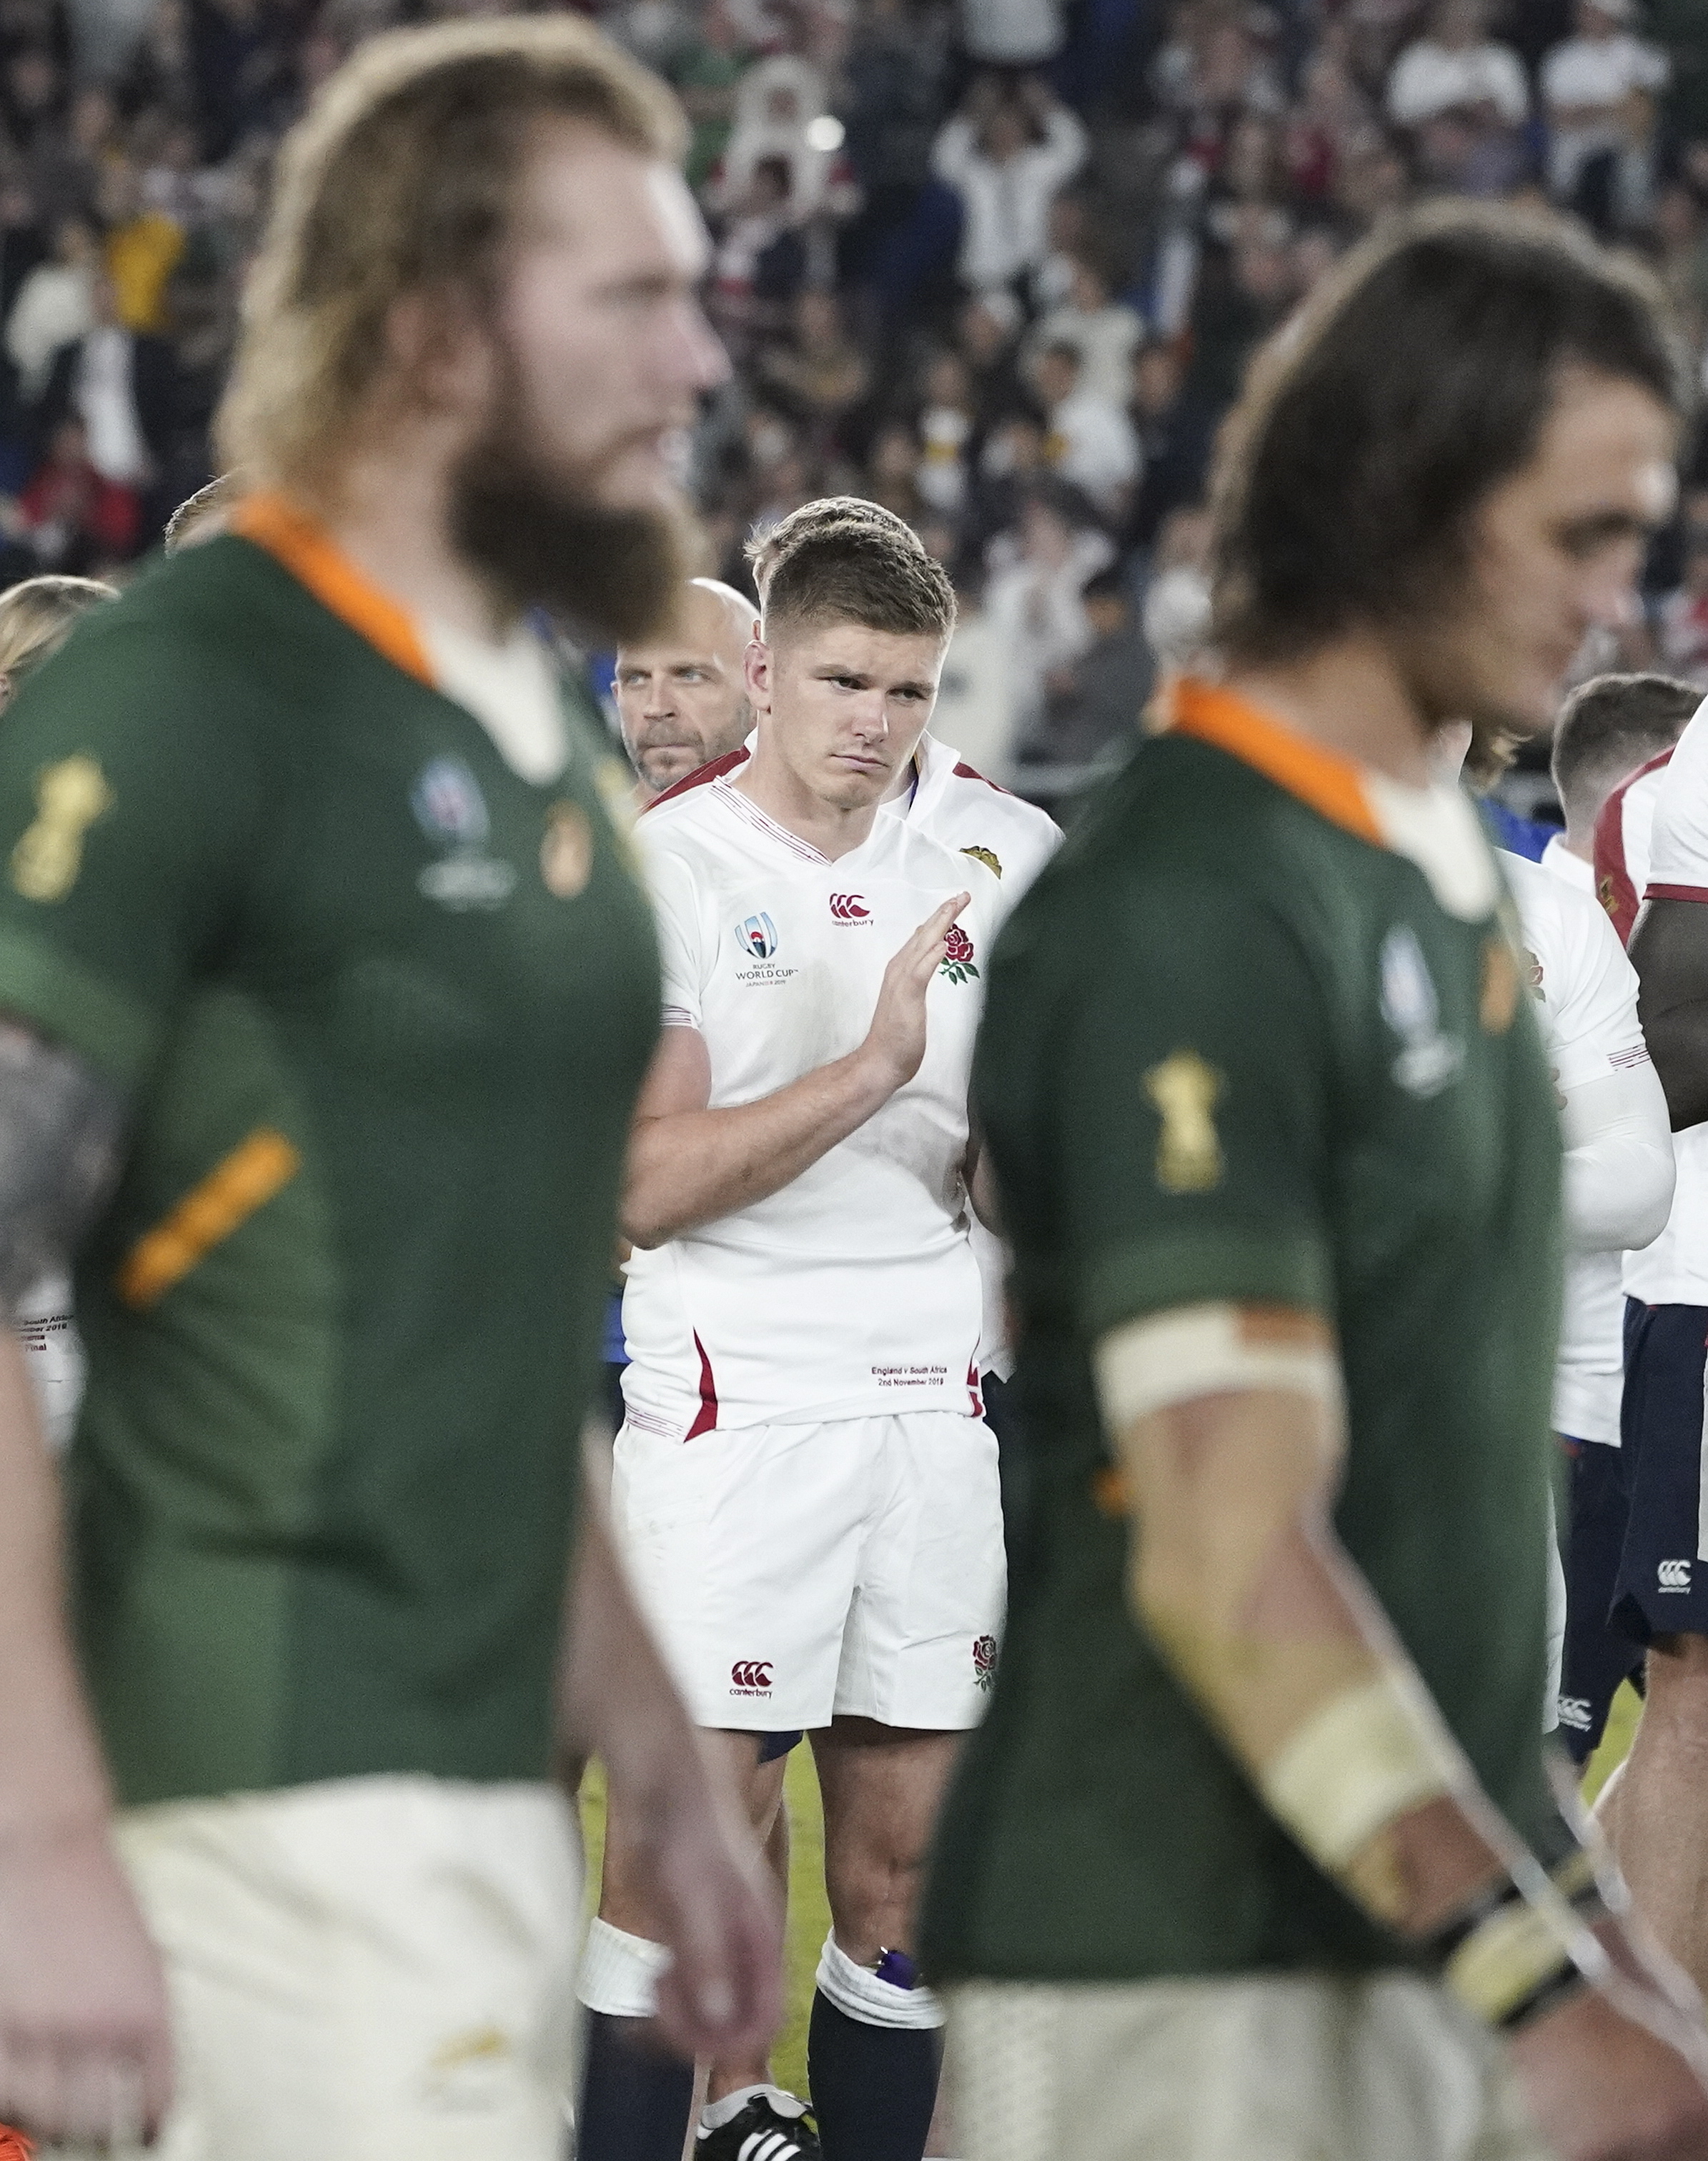 epa07966457 Owen Farrell of England (C) applauds during the medal ceremony after the Rugby World Cup final match between England and South Africa at the International Stadium Yokohama, Kanagawa Prefecture, Yokohama, Japan, 02 November 2019. EPA/FRANCK ROBICHON EDITORIAL USE ONLY/ NO COMMERCIAL SALES / NOT USED IN ASSOCATION WITH ANY COMMERCIAL ENTITY